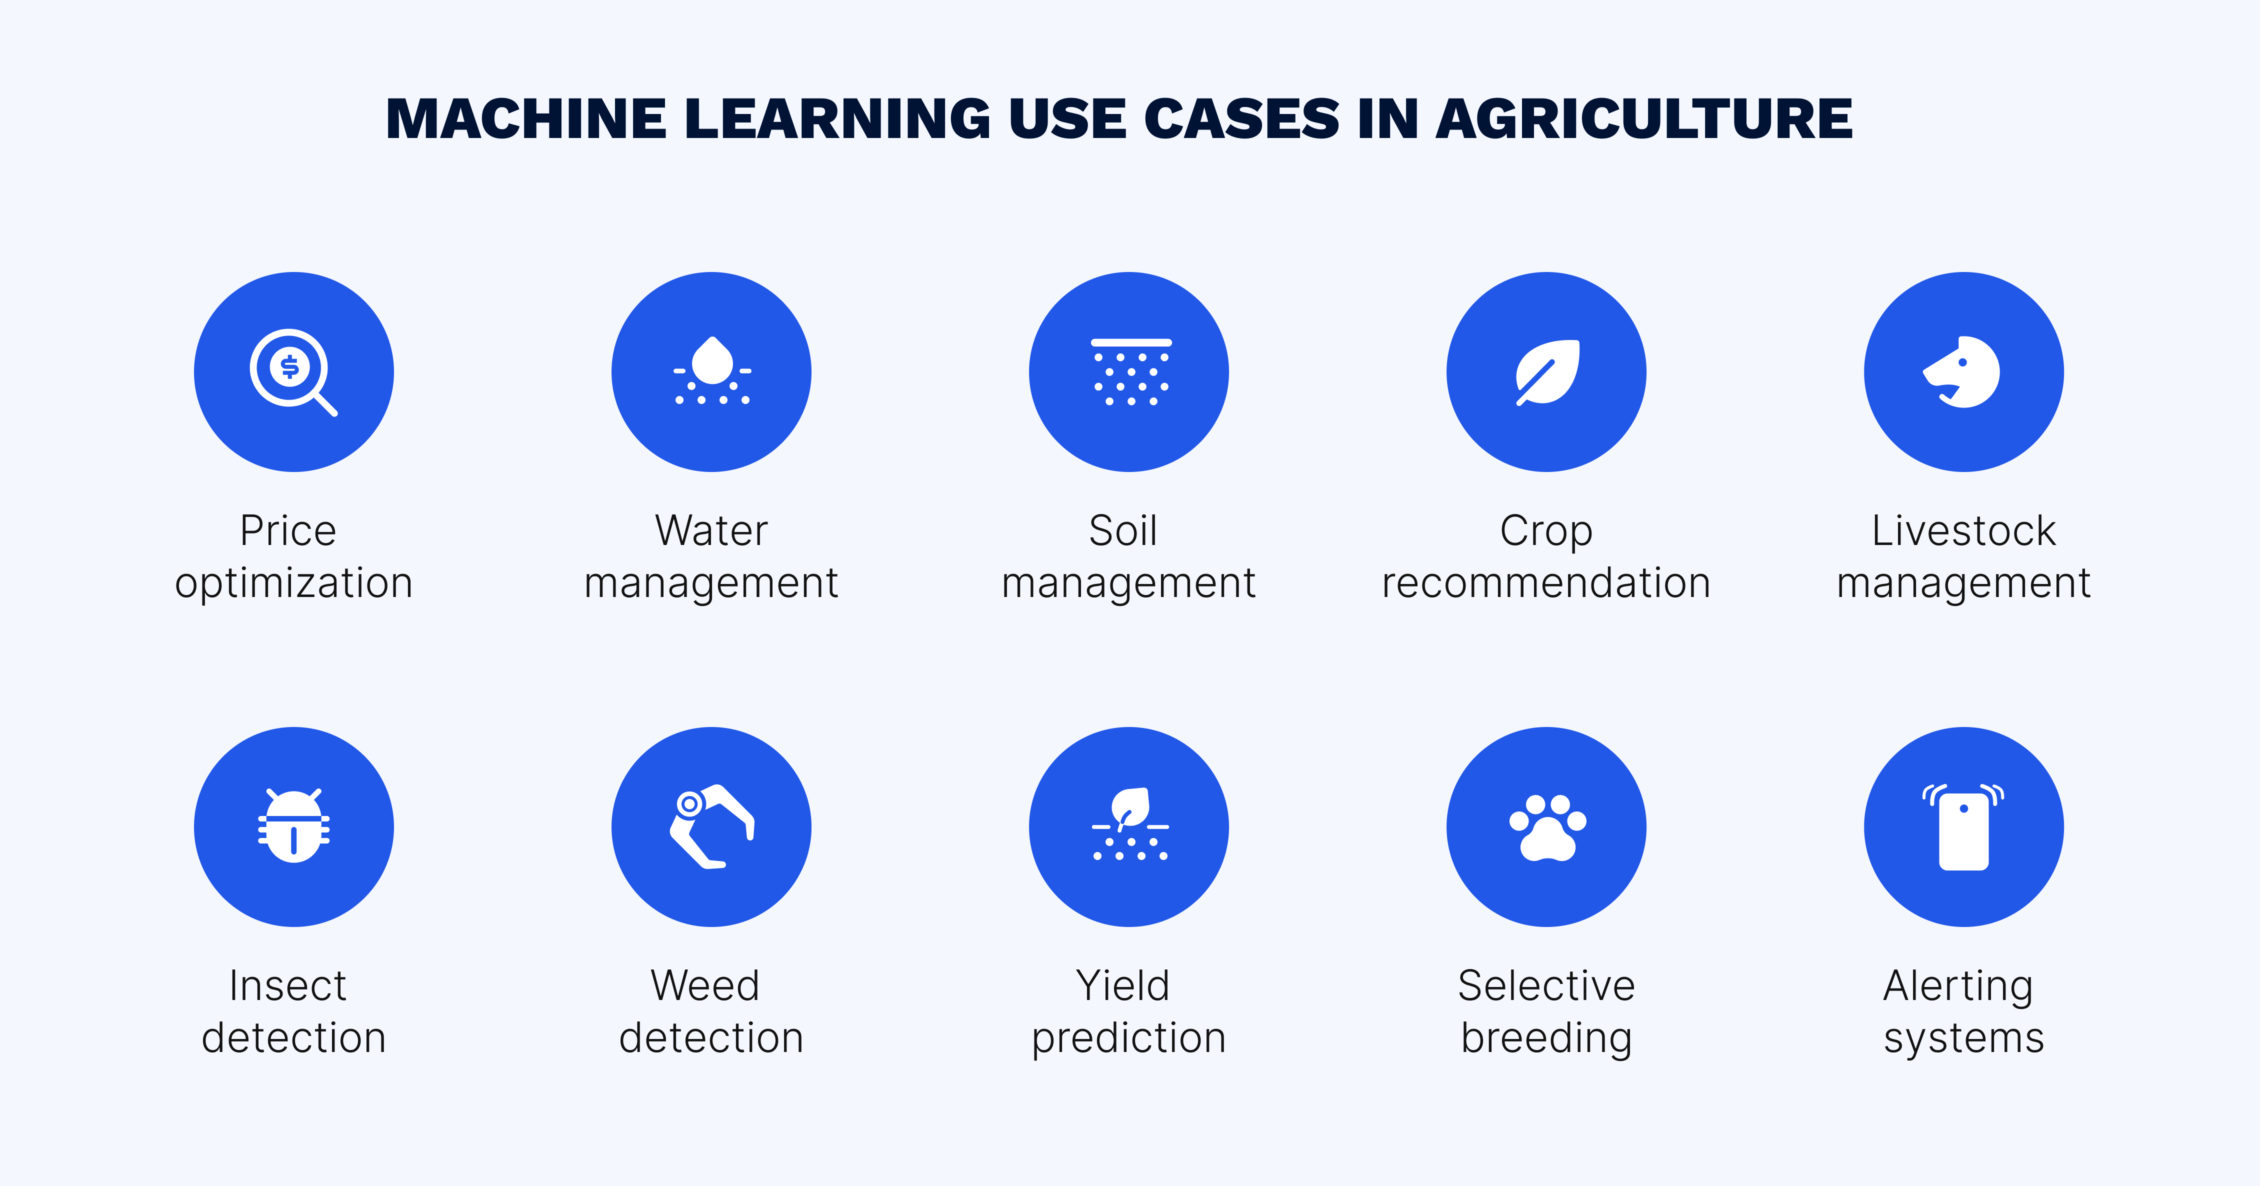 Examples of use cases for machine learning in agriculture